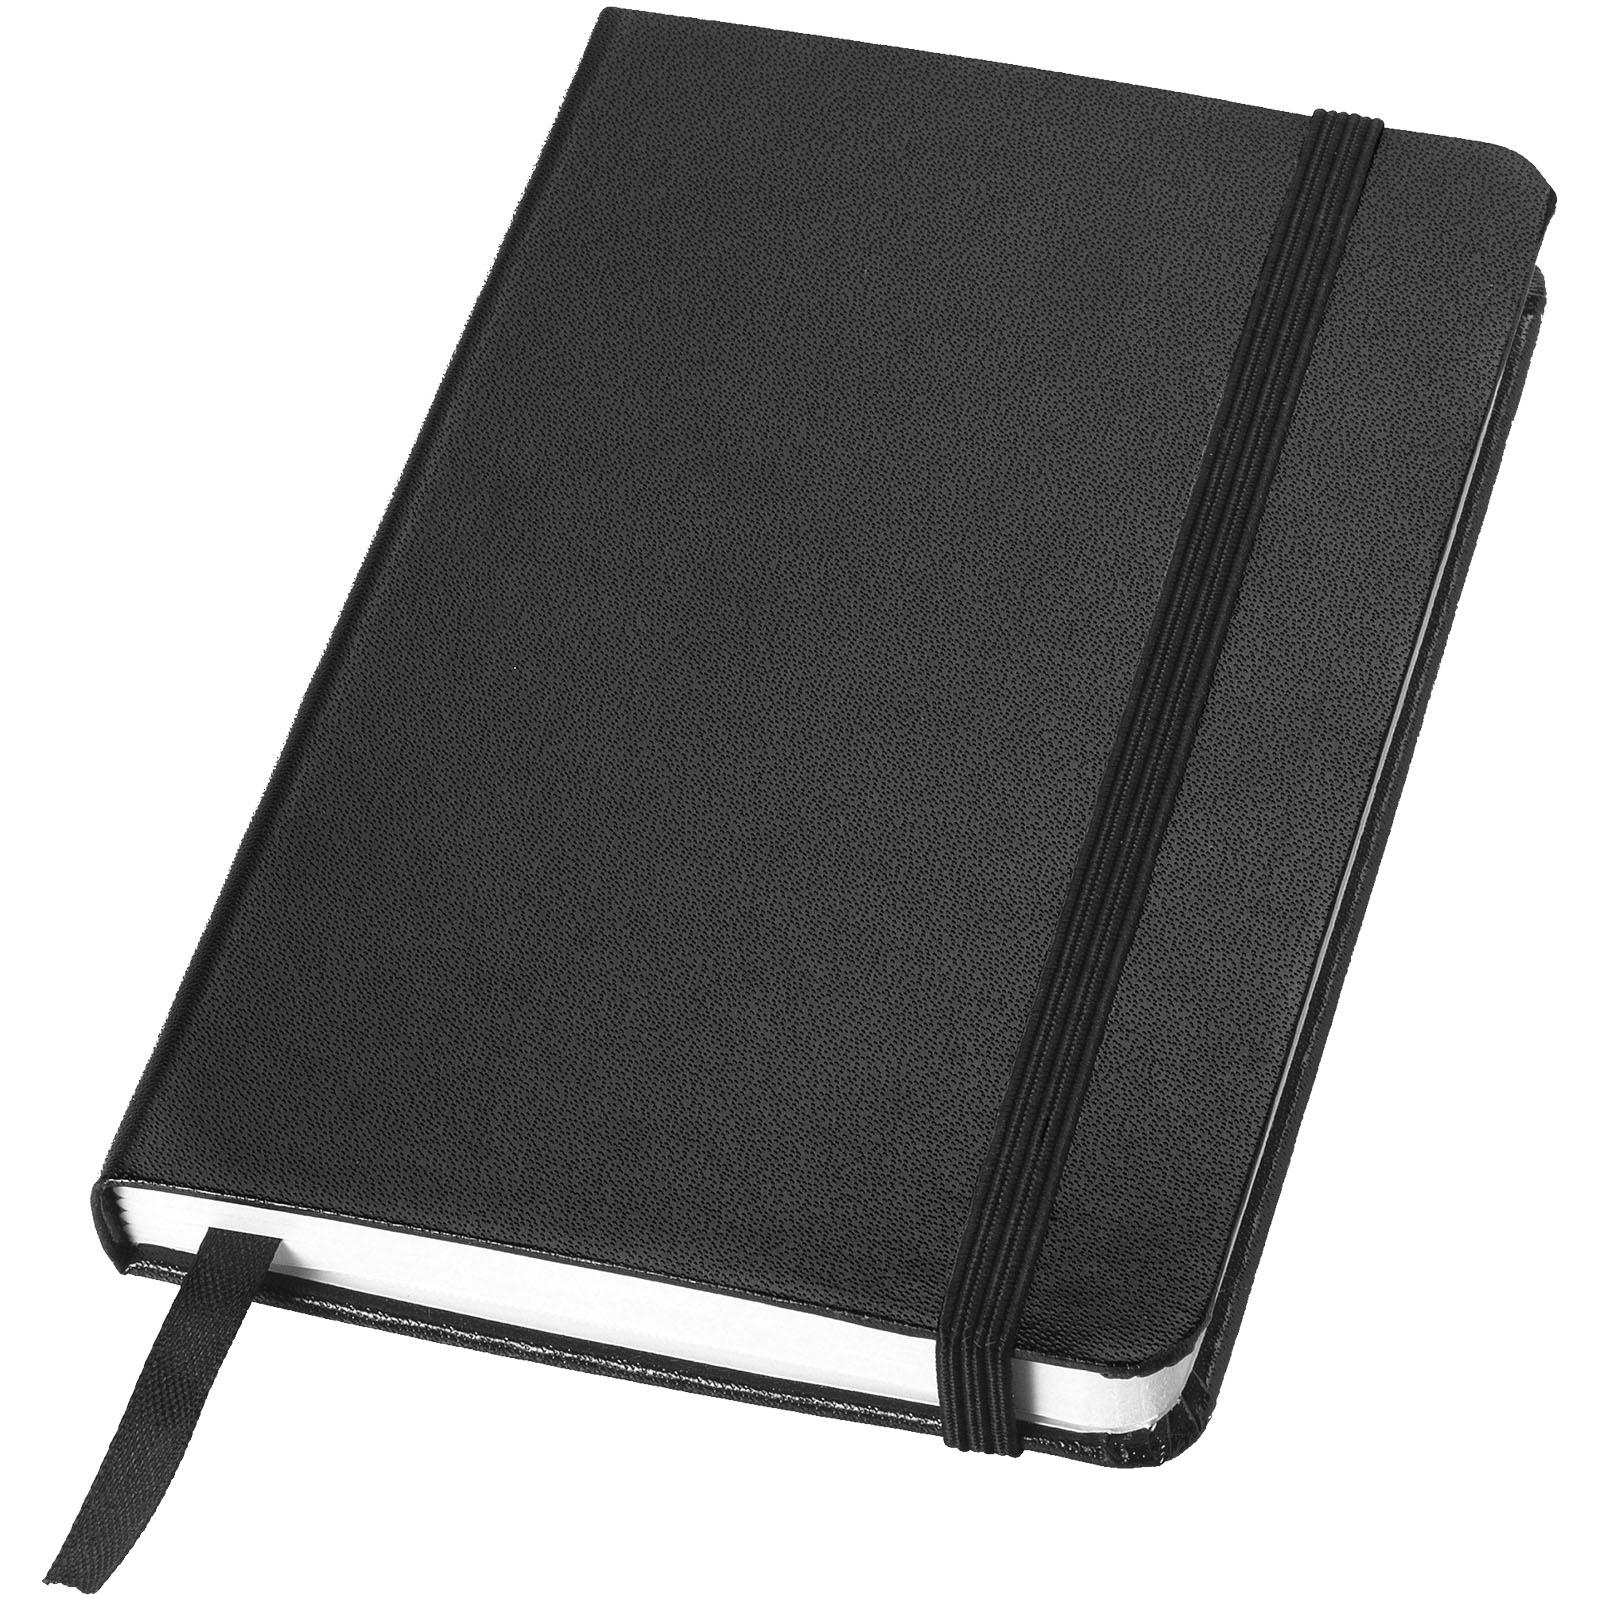 Advertising Hard cover notebooks - Classic A6 hard cover pocket notebook - 0